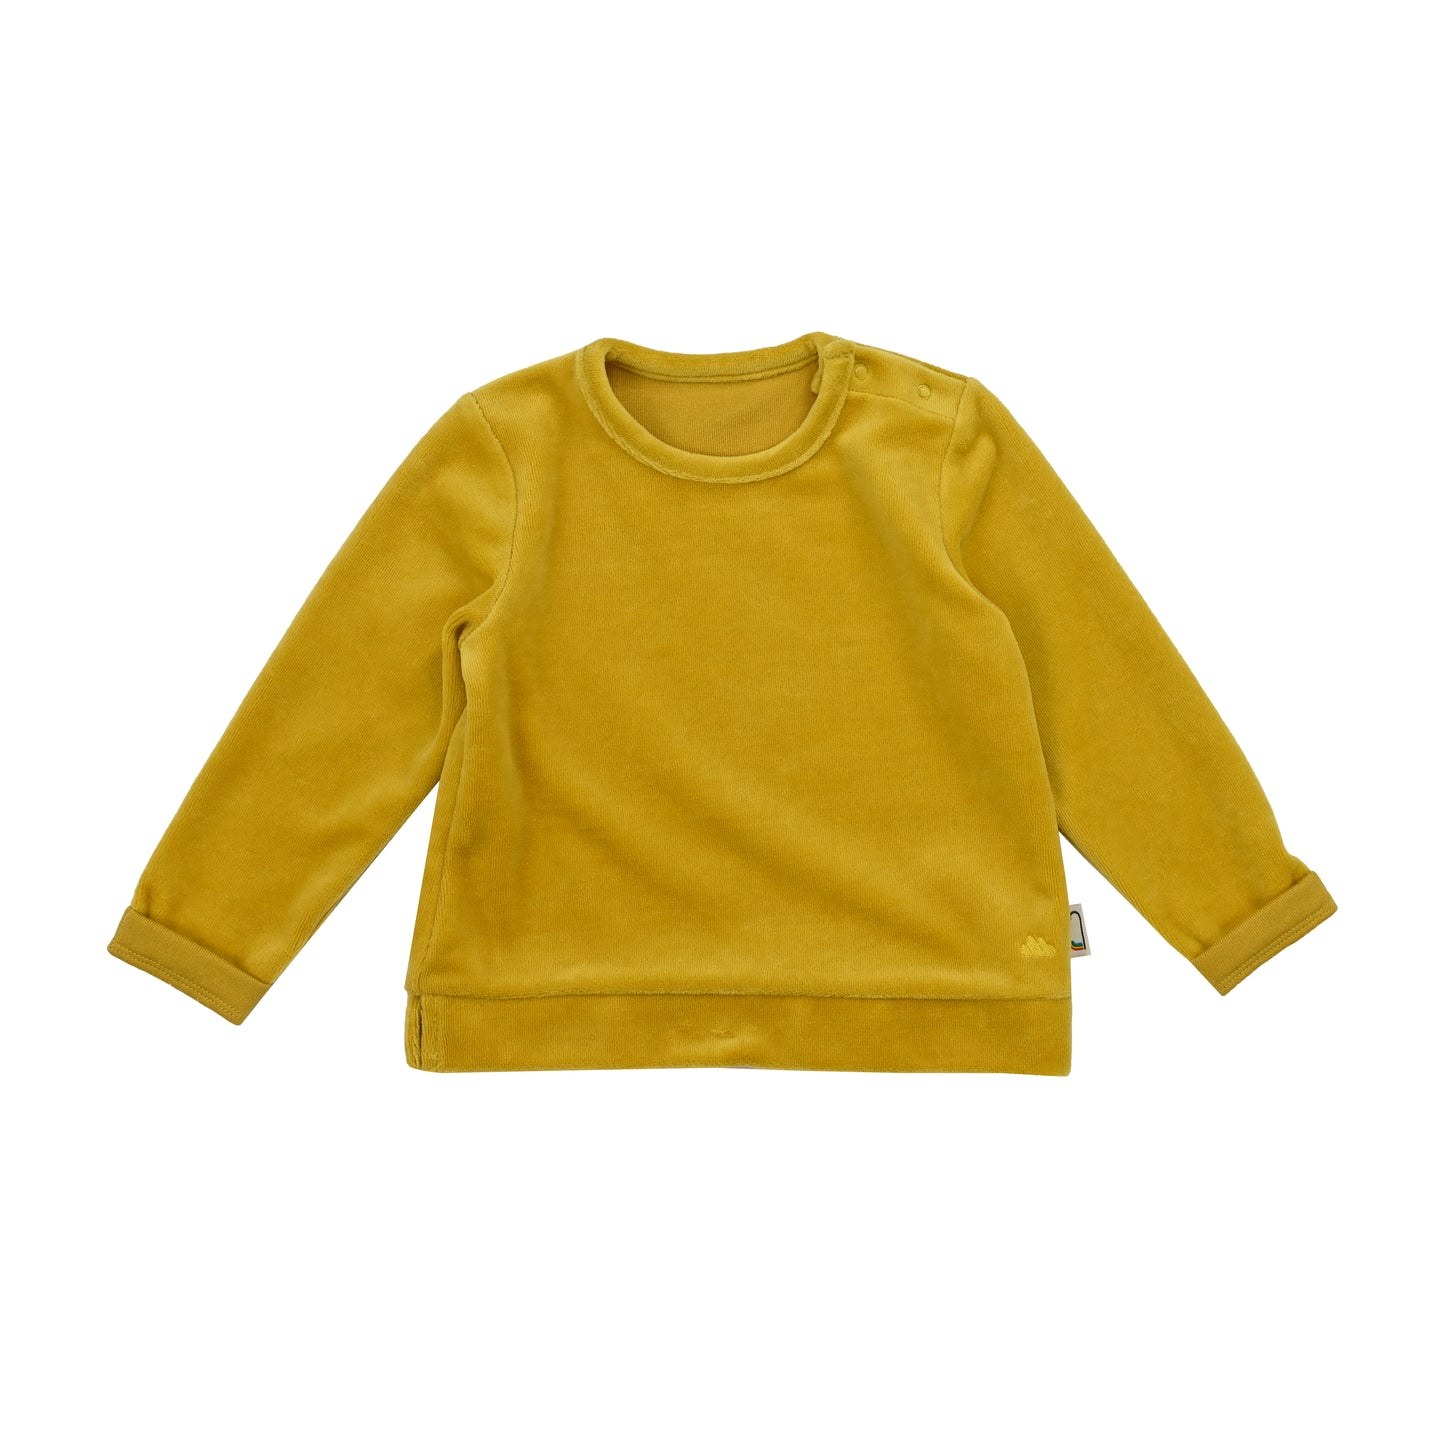 BABY LONG-SLEEVES SPORTS TWIN SETS